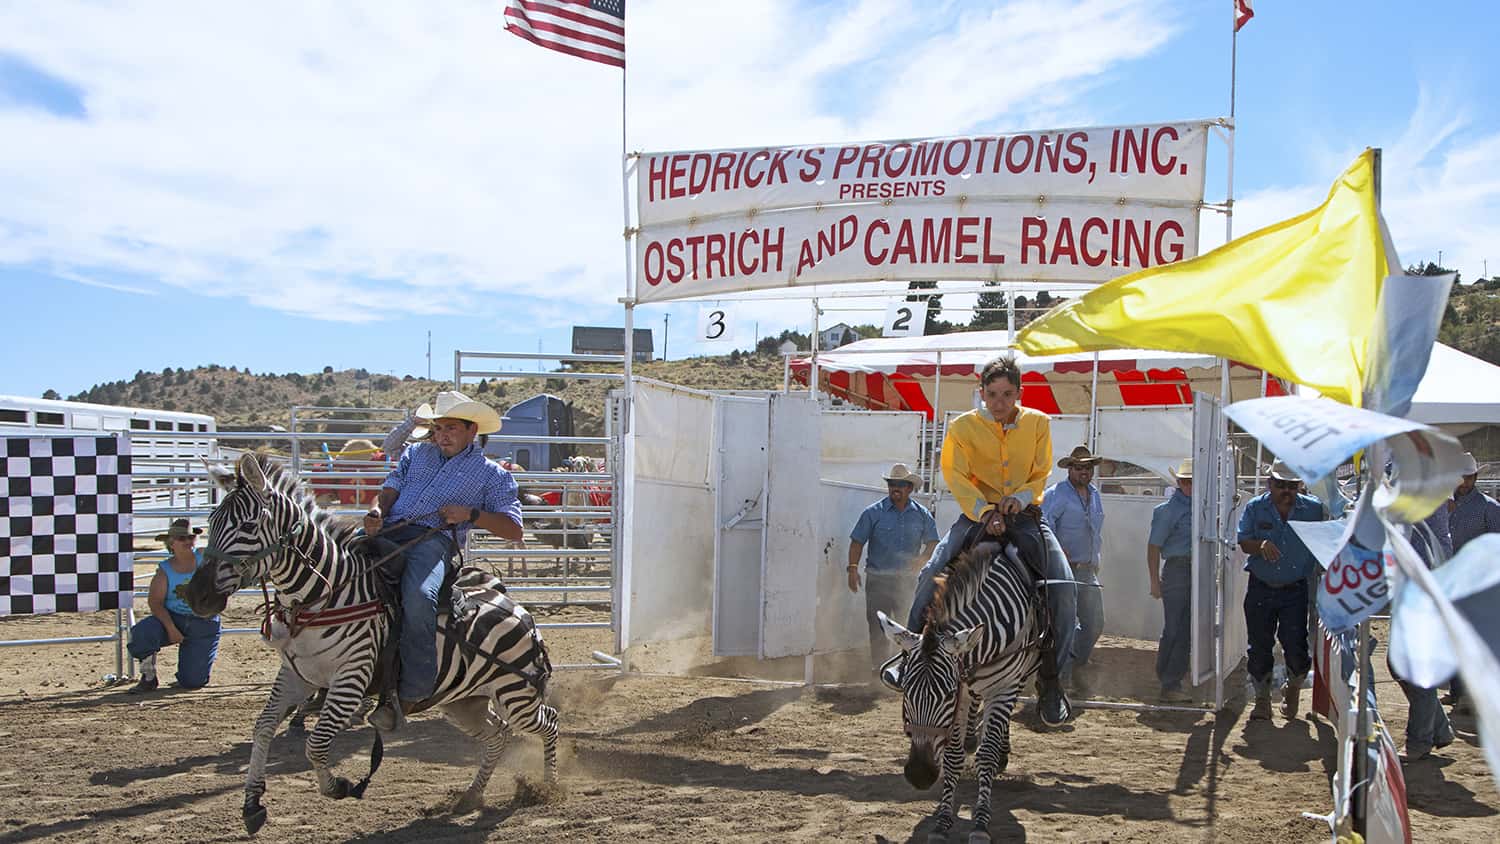 Out of the box come Zebras! at the Virginia City Nevada Camel and Ostrich races.